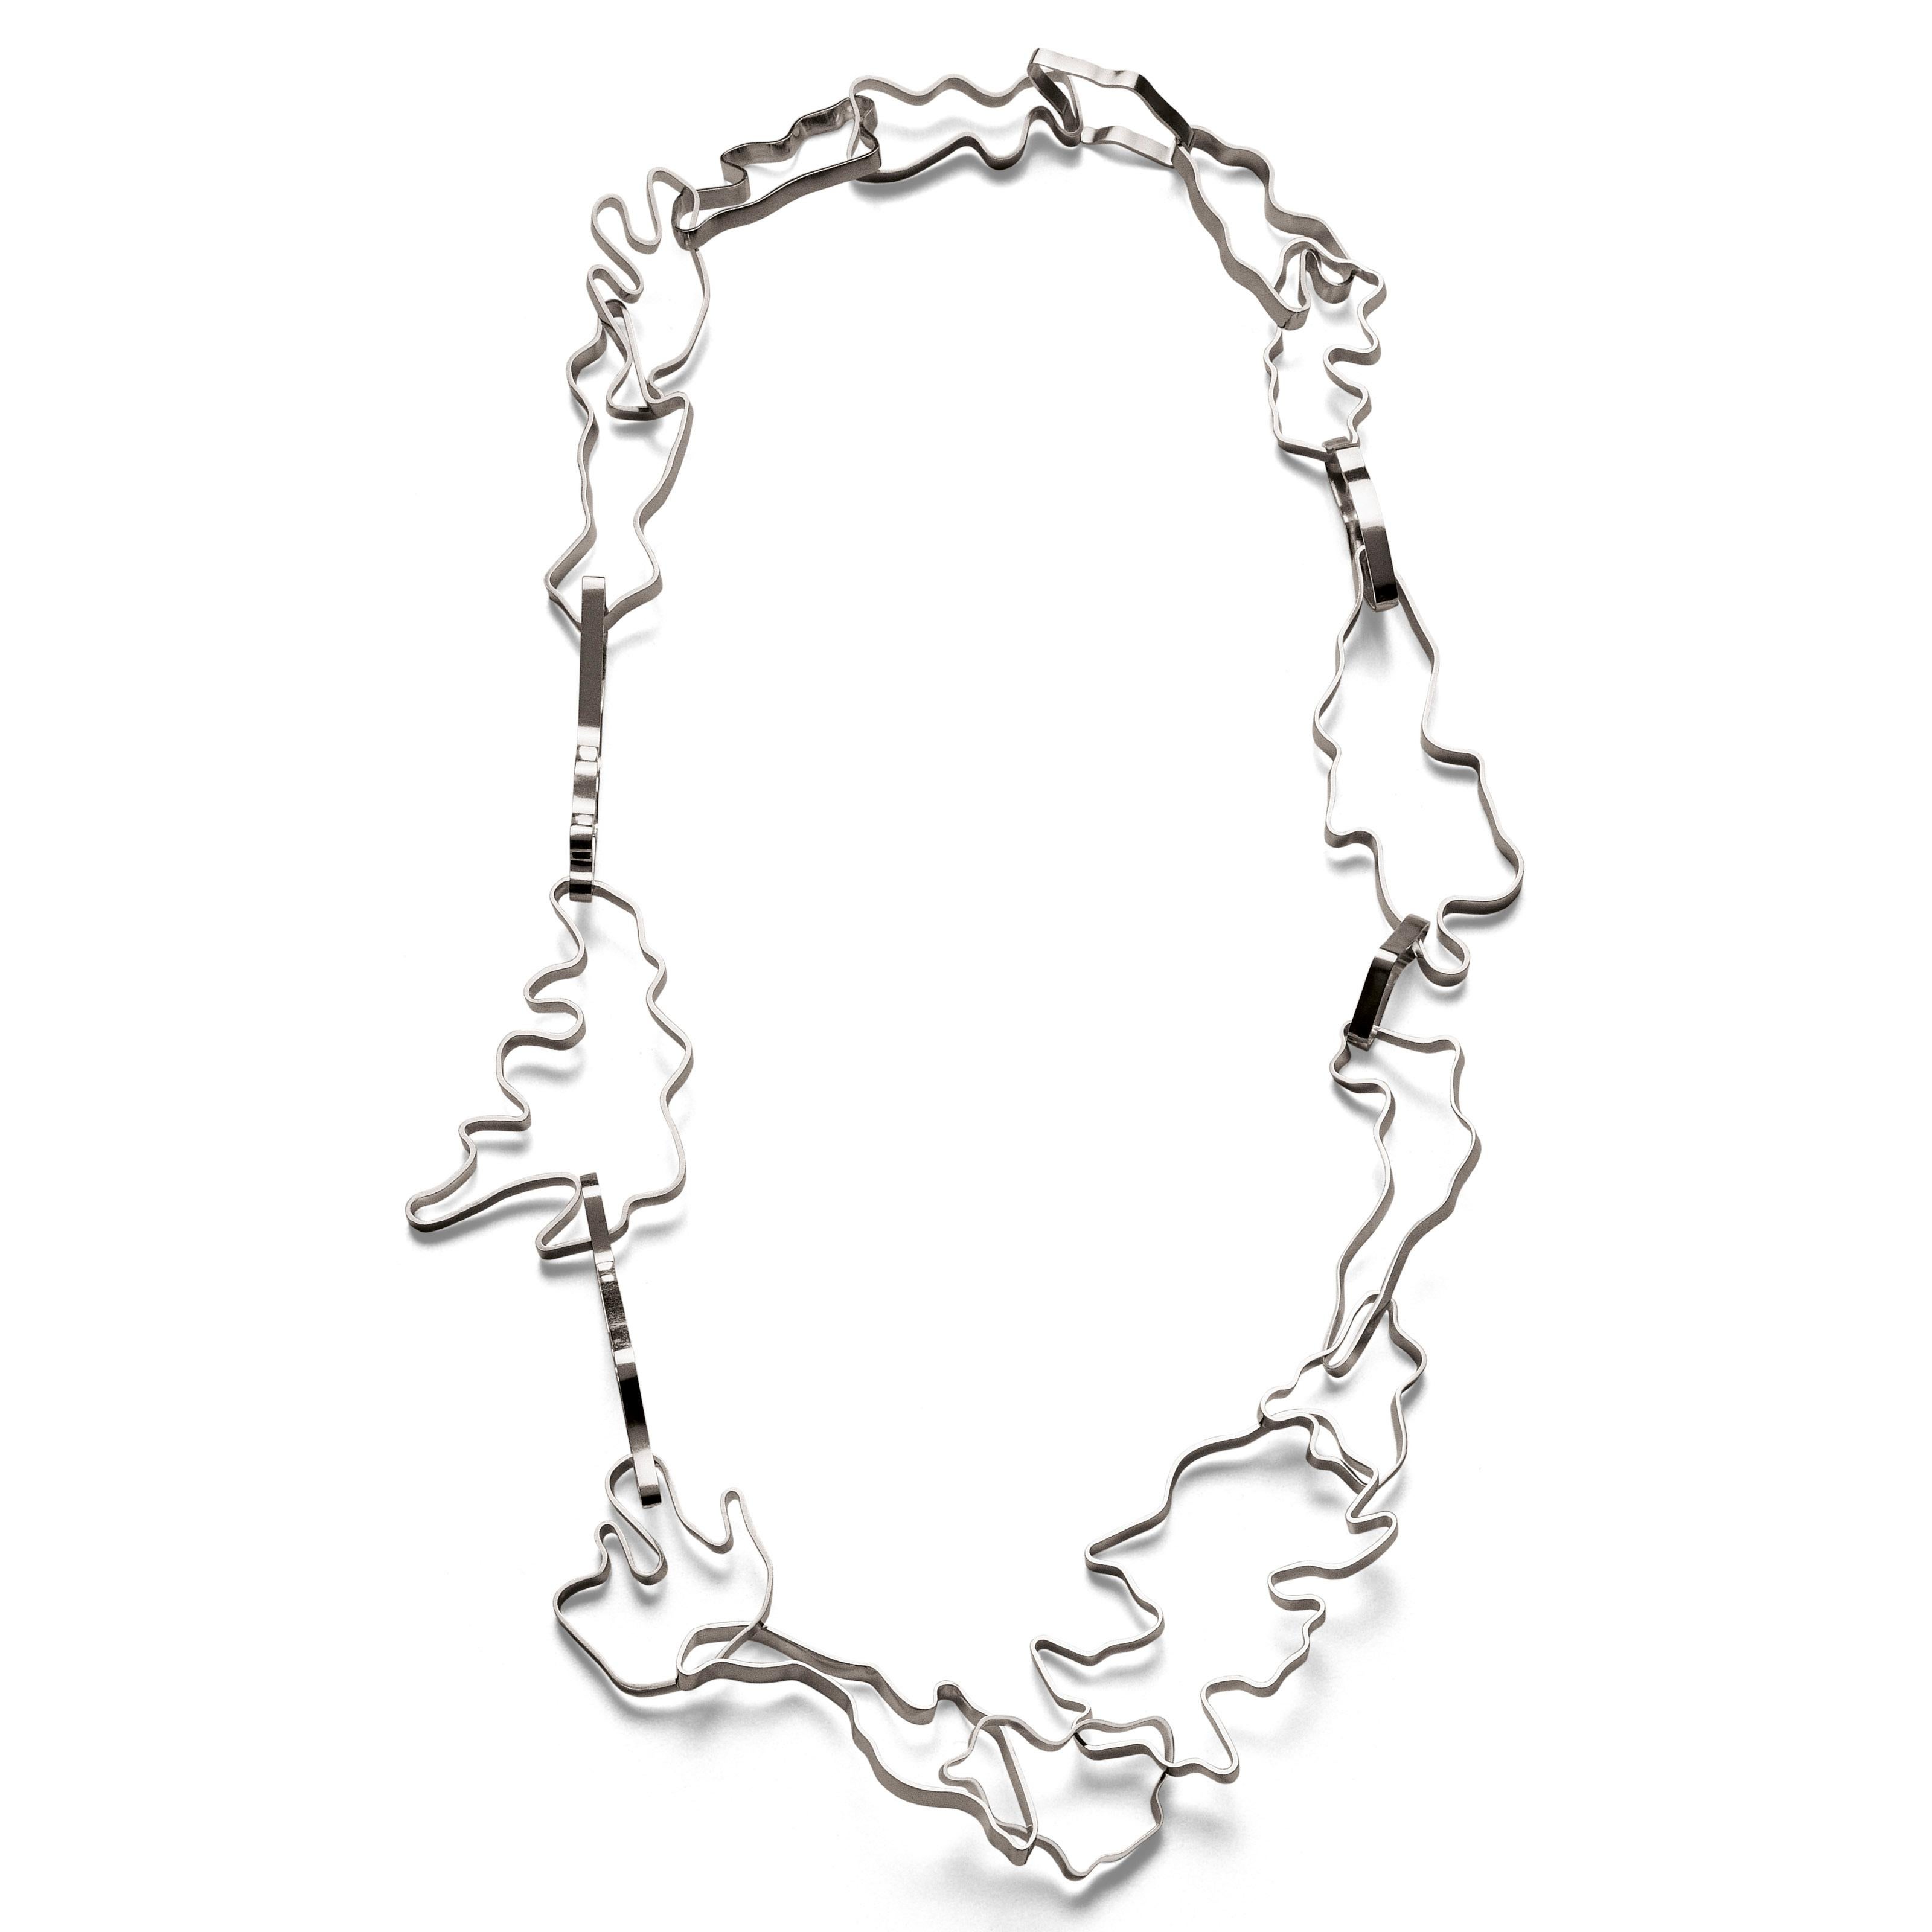 Nathalie Jean Contemporary Sterling Silver Limited Edition Link Chain Necklace 1